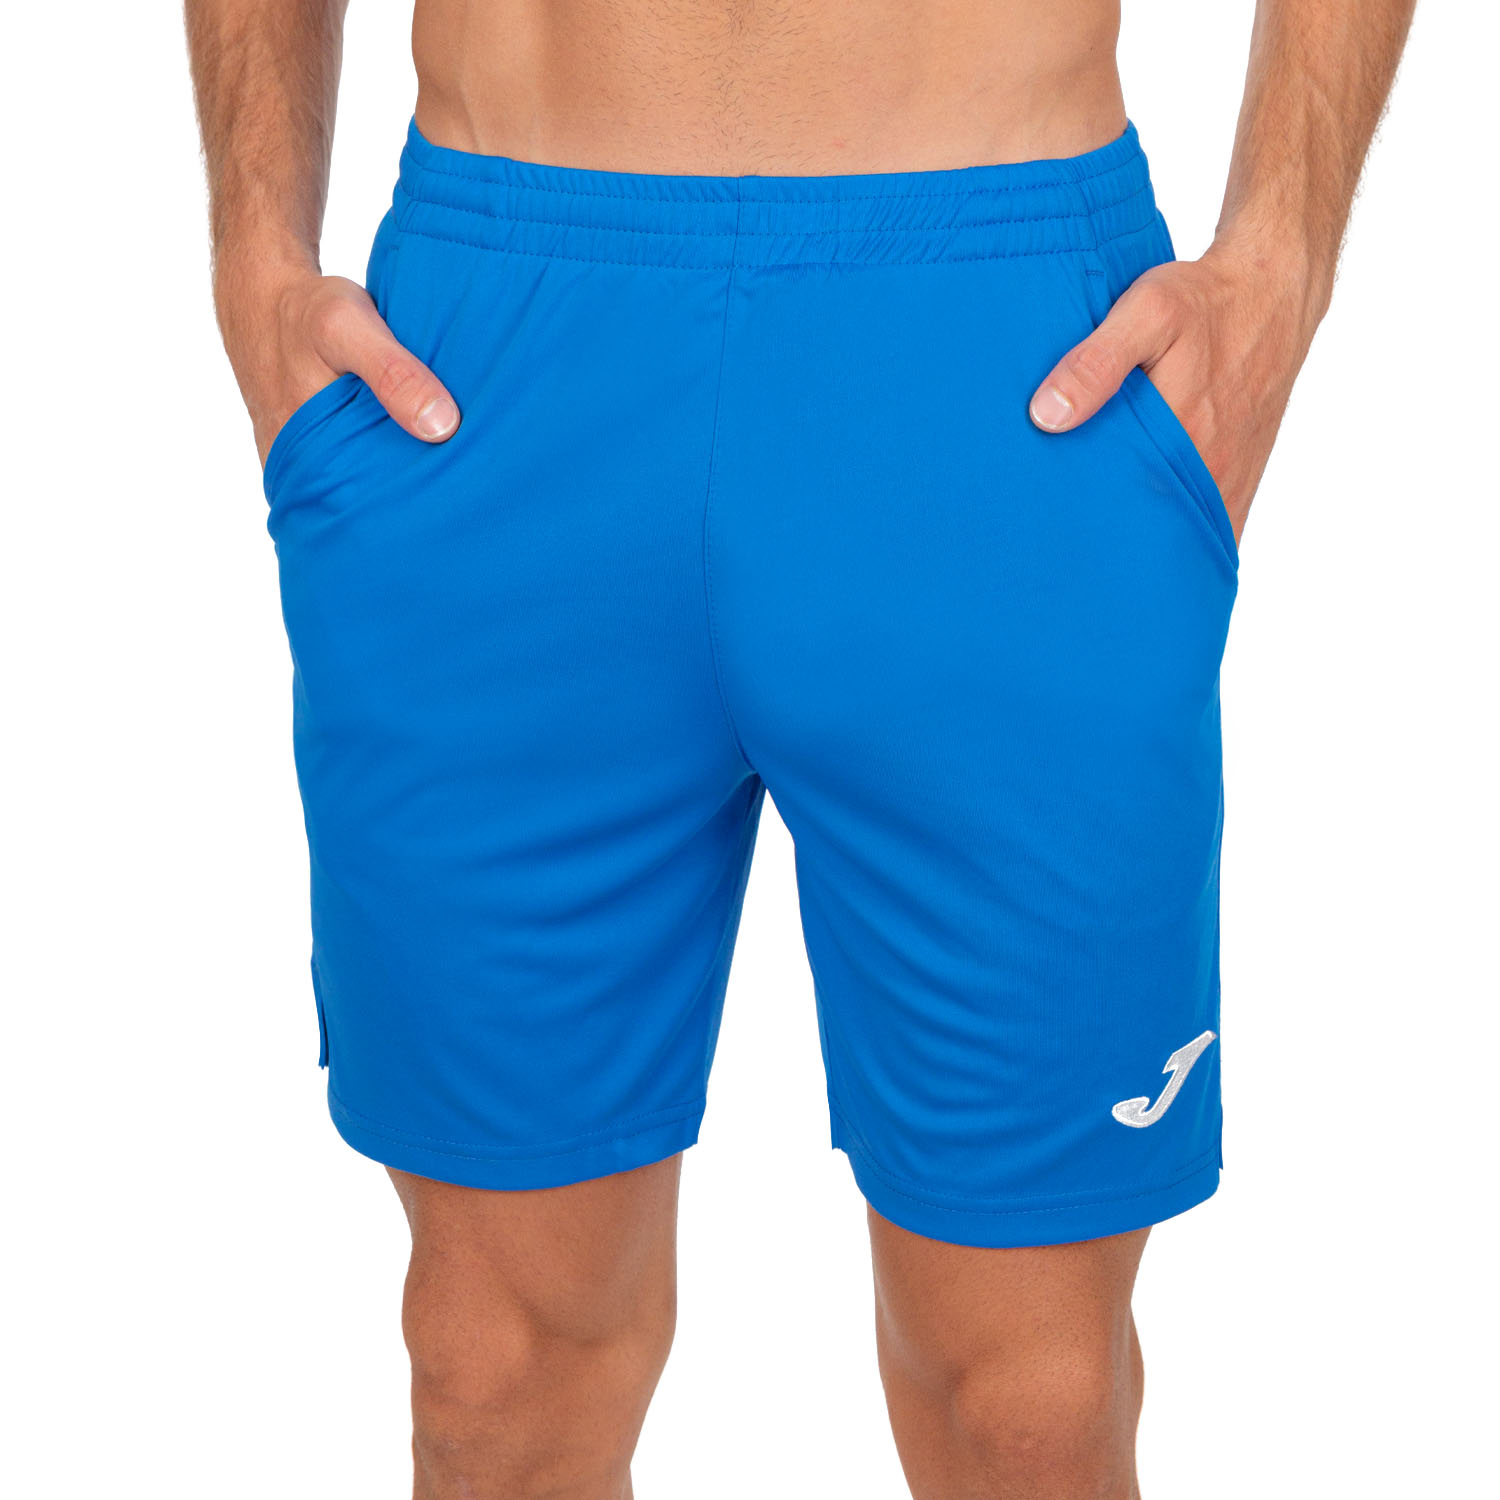 Joma Drive 7.5in Shorts - Blue/White